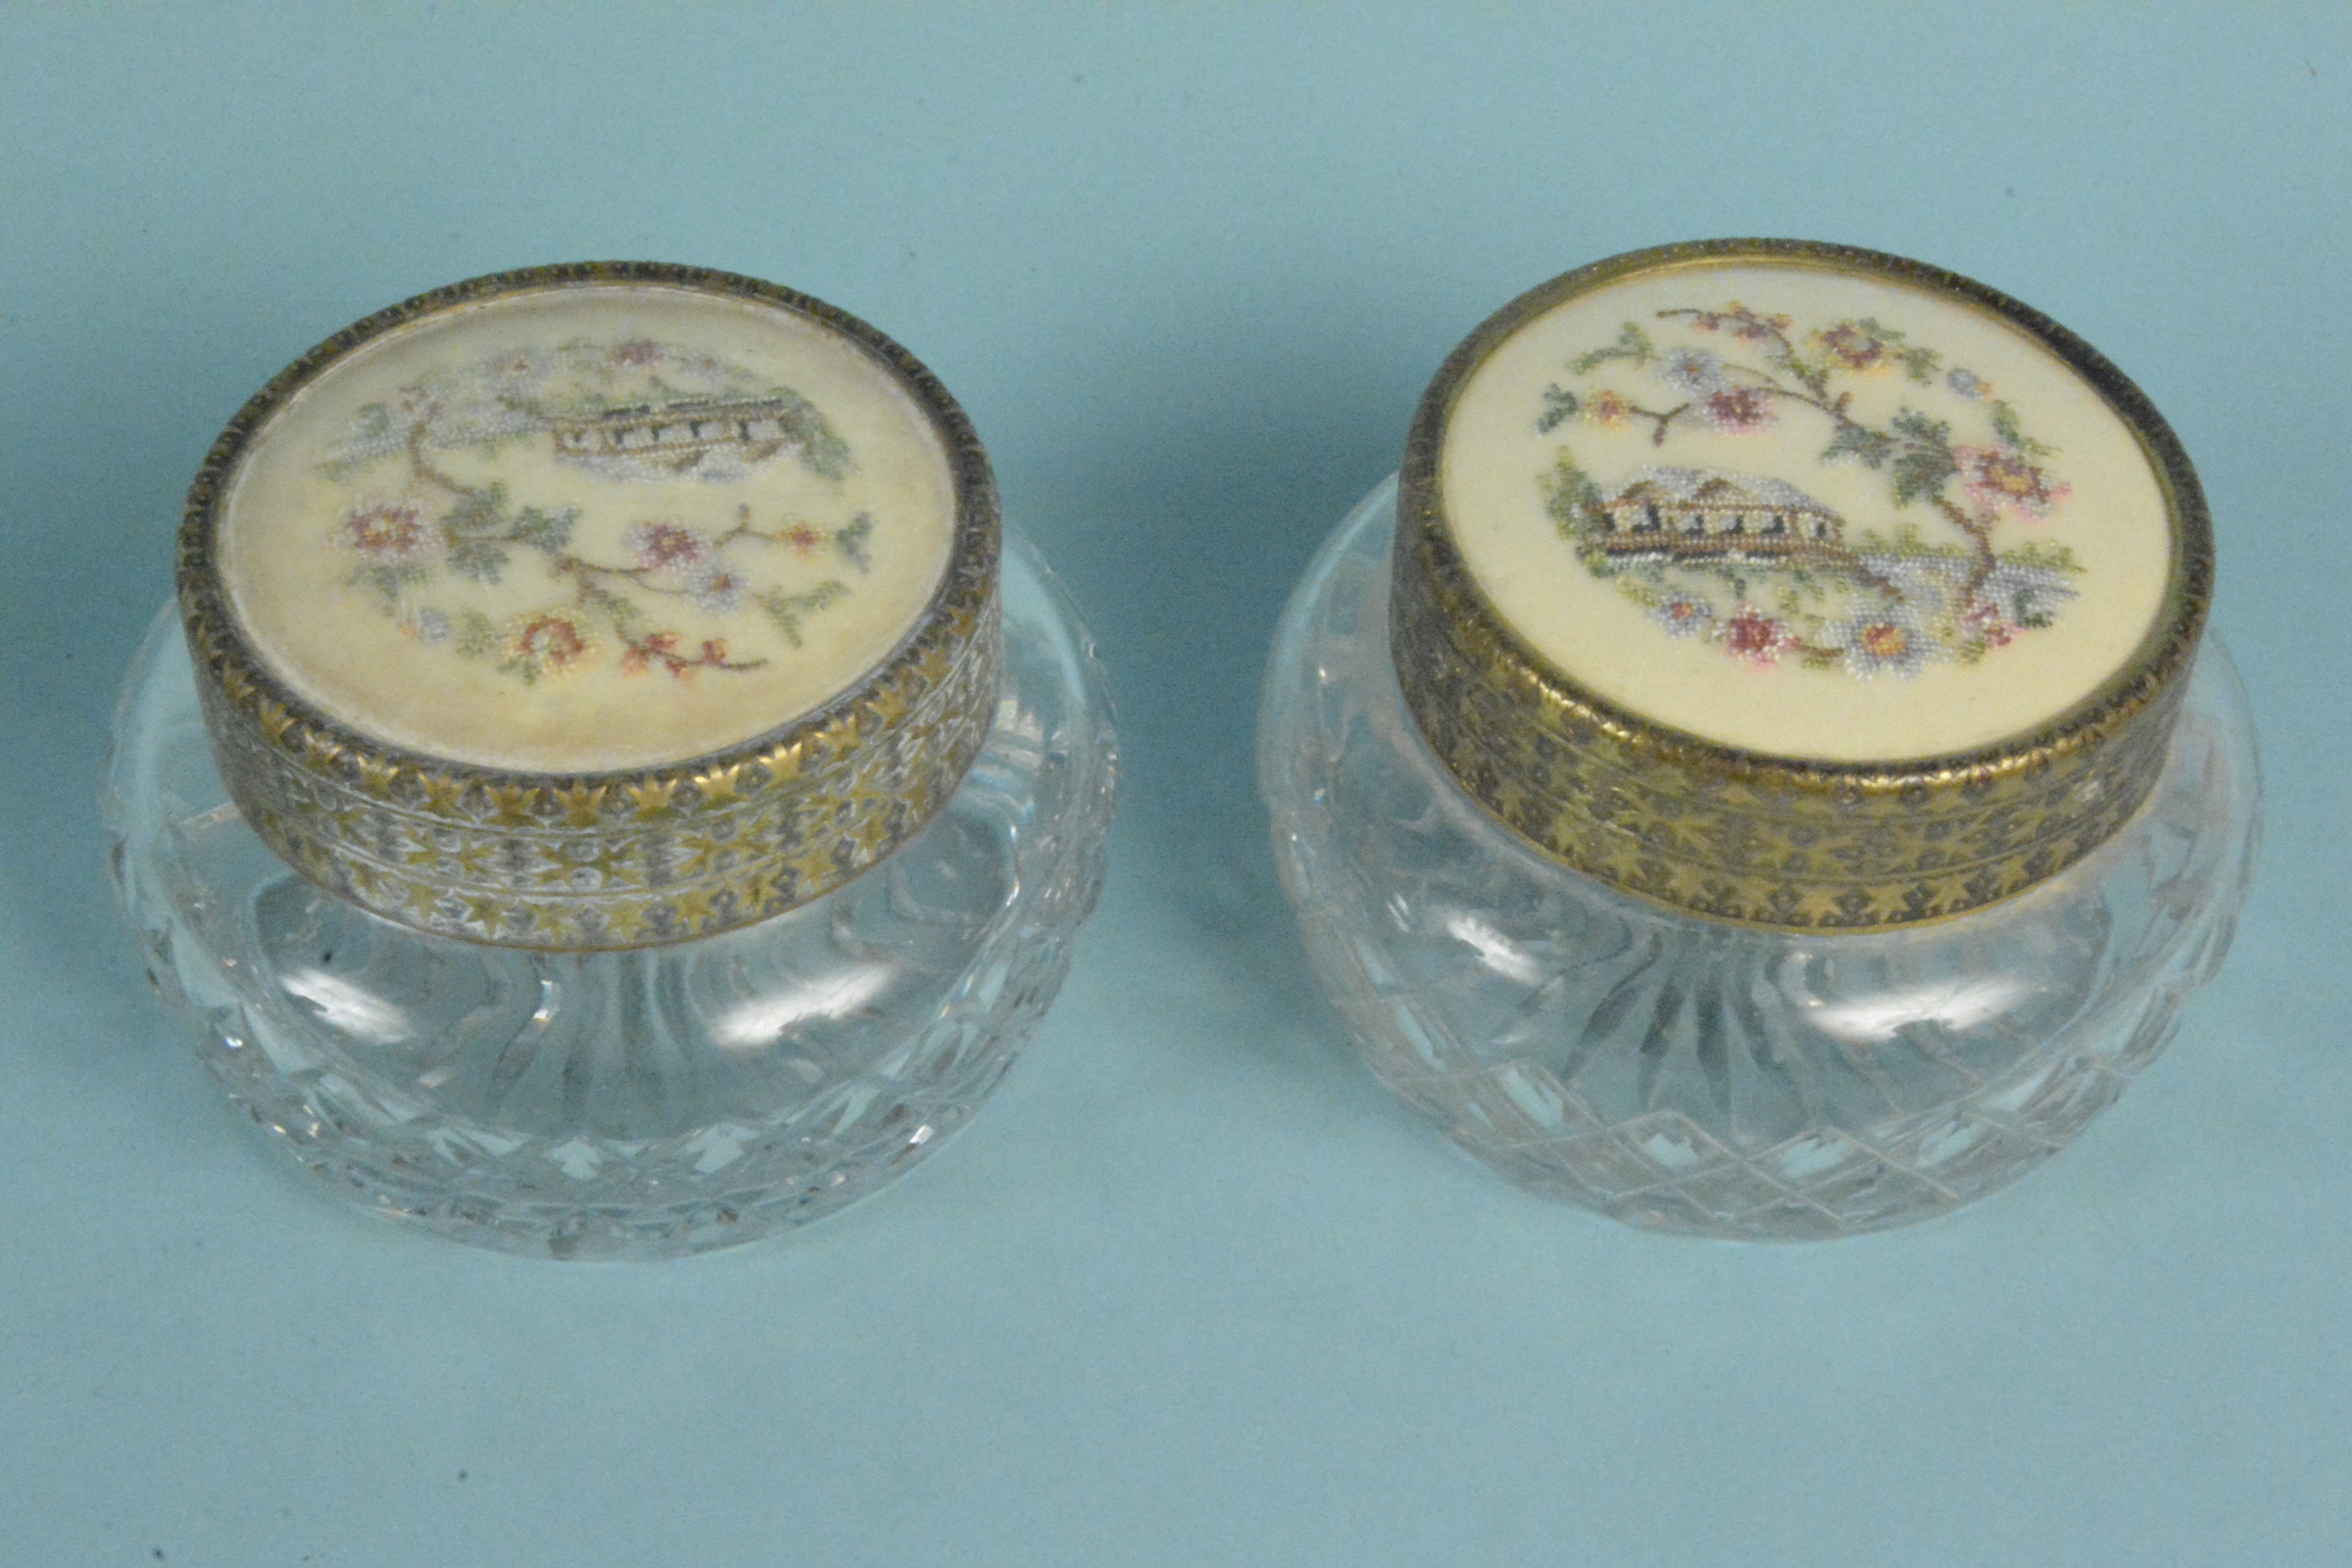 A vintage lace inlaid dressing table set with cut glass powder pots with embroidered inserts (as - Image 3 of 3